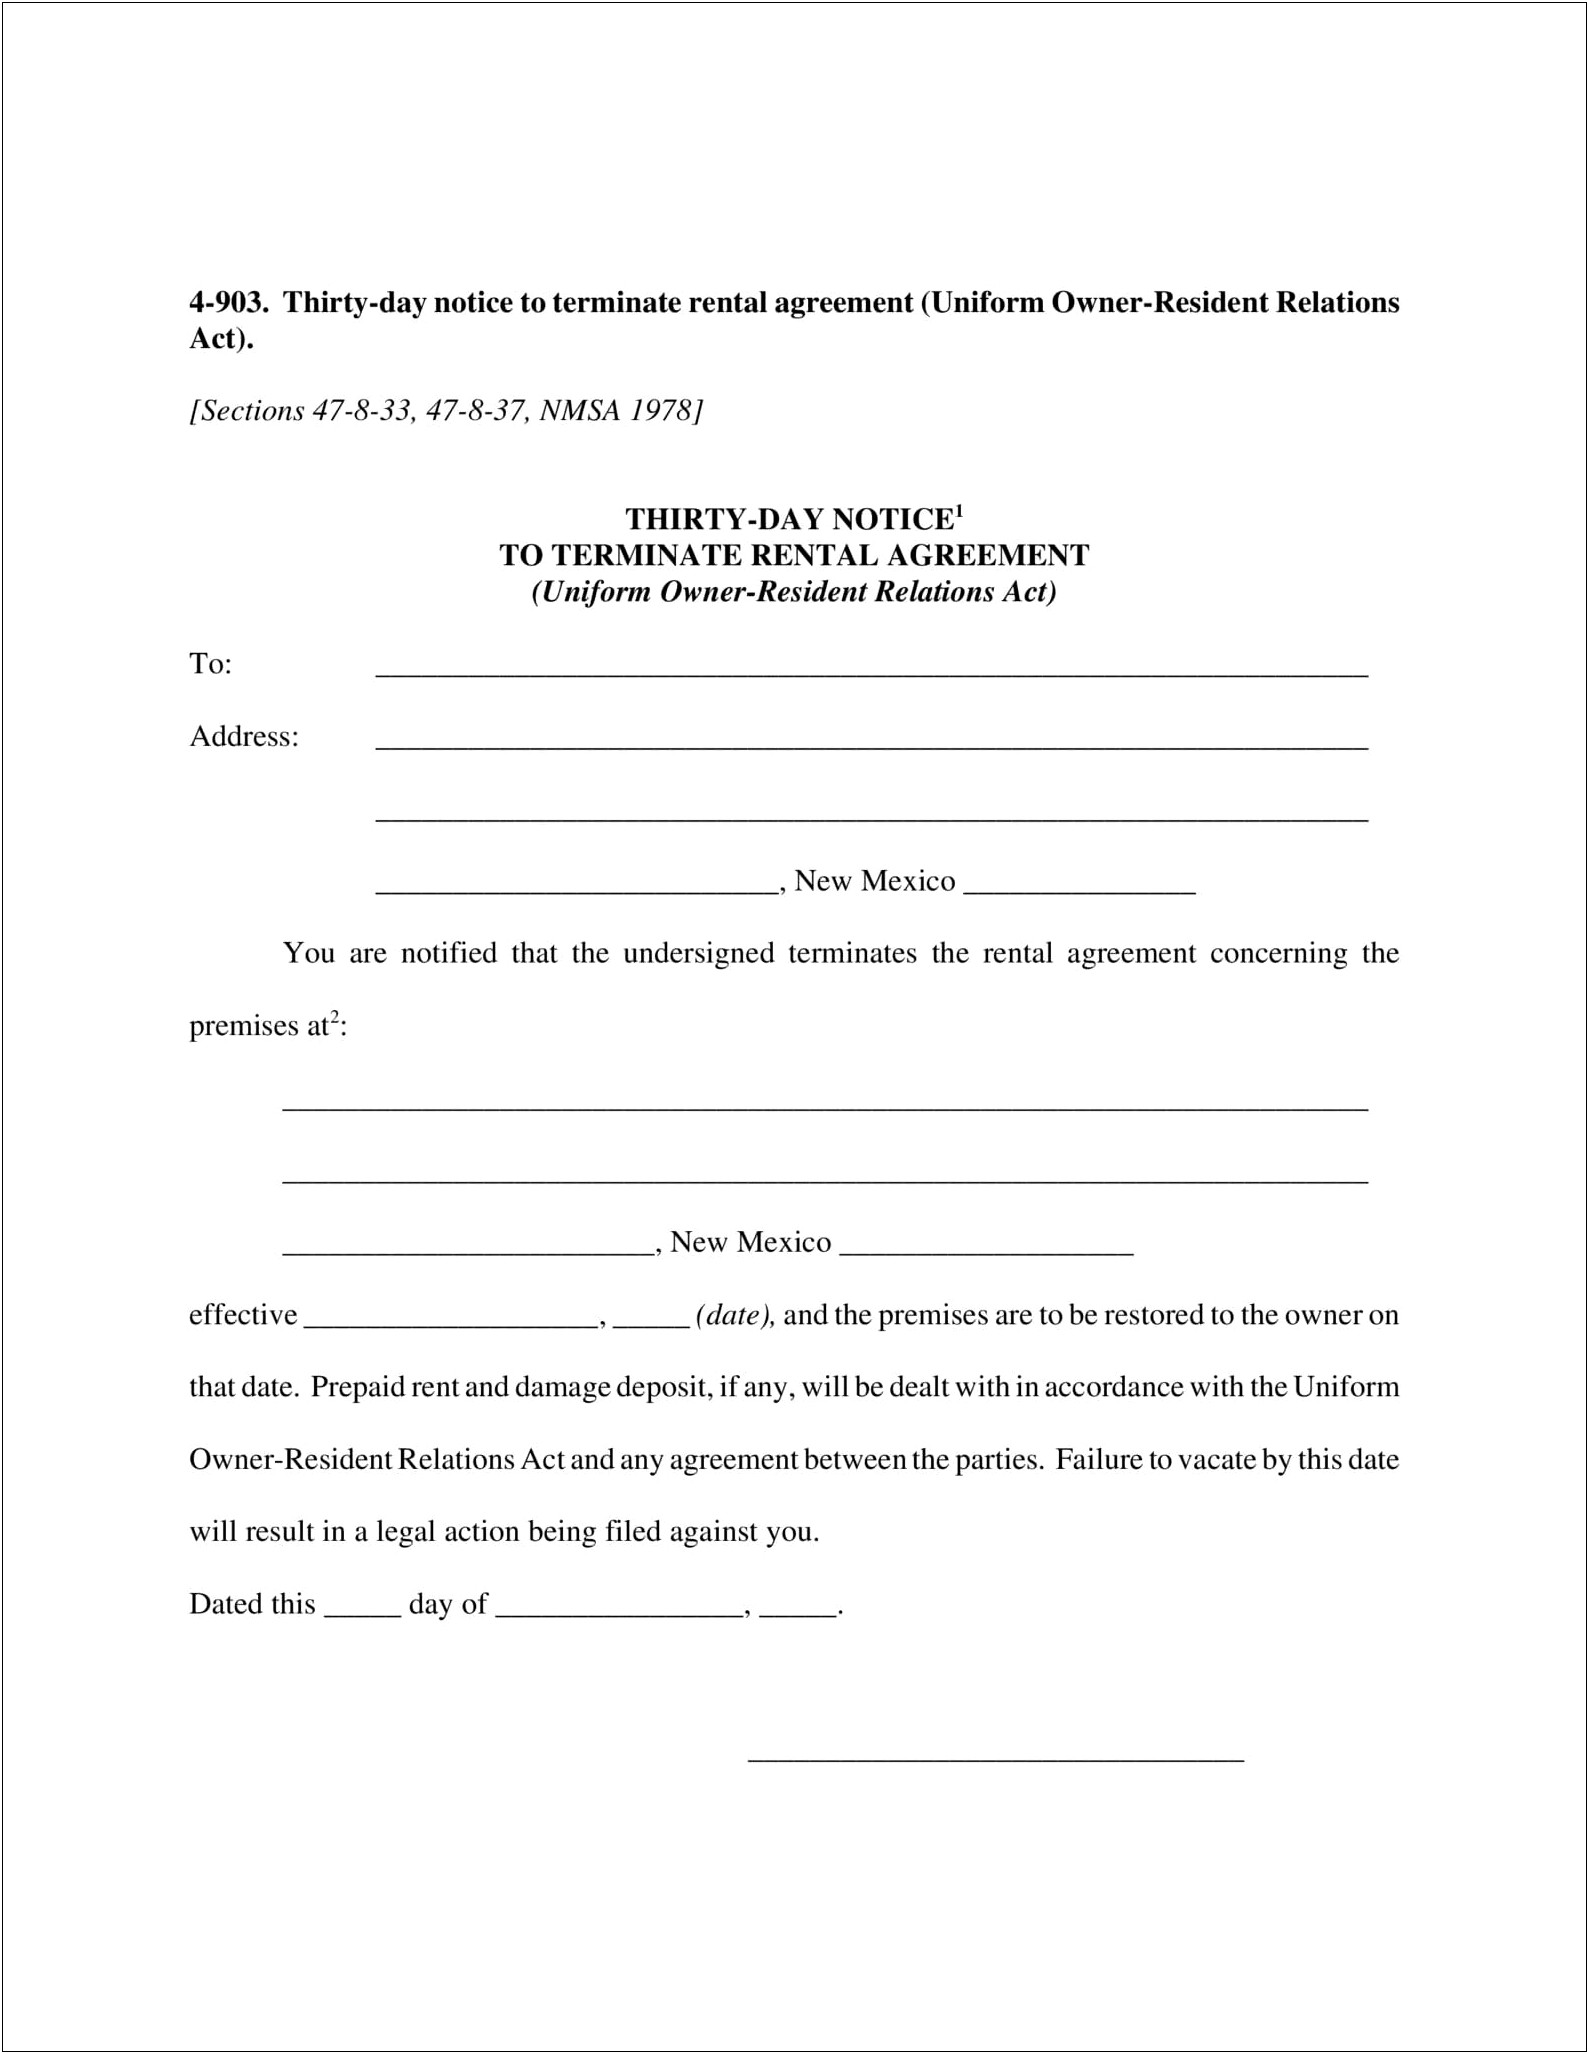 Free New Mexico Lease Agreement Template